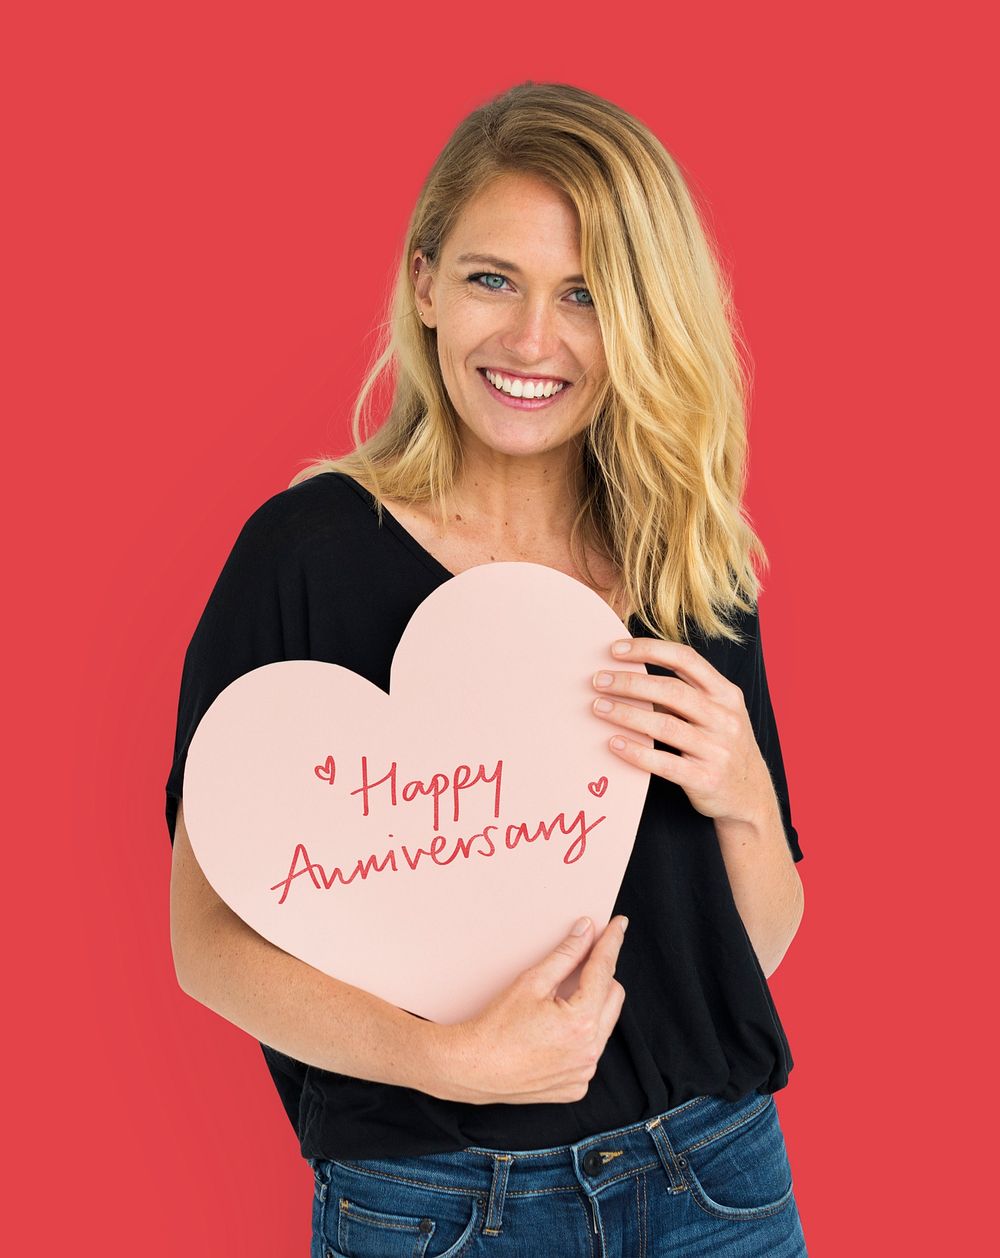 Cheerful woman holding a Happy Anniversary heart